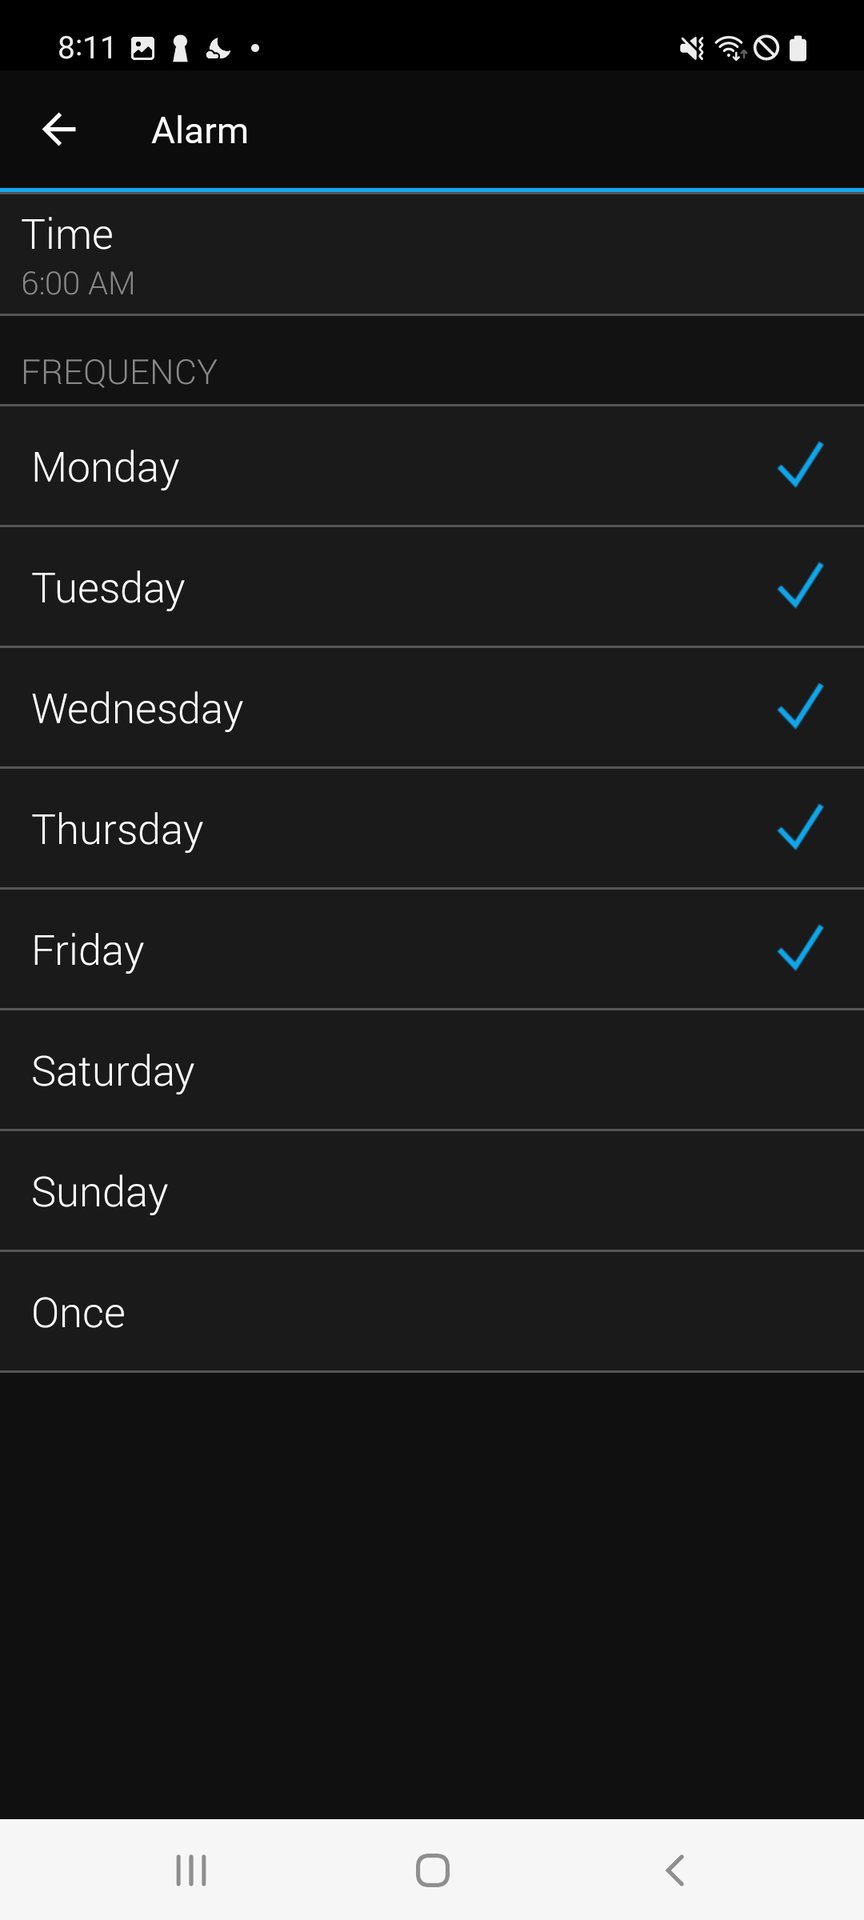 A screenshot of the Garmin Connect app displays the time and frequency menu for setting an alarm.